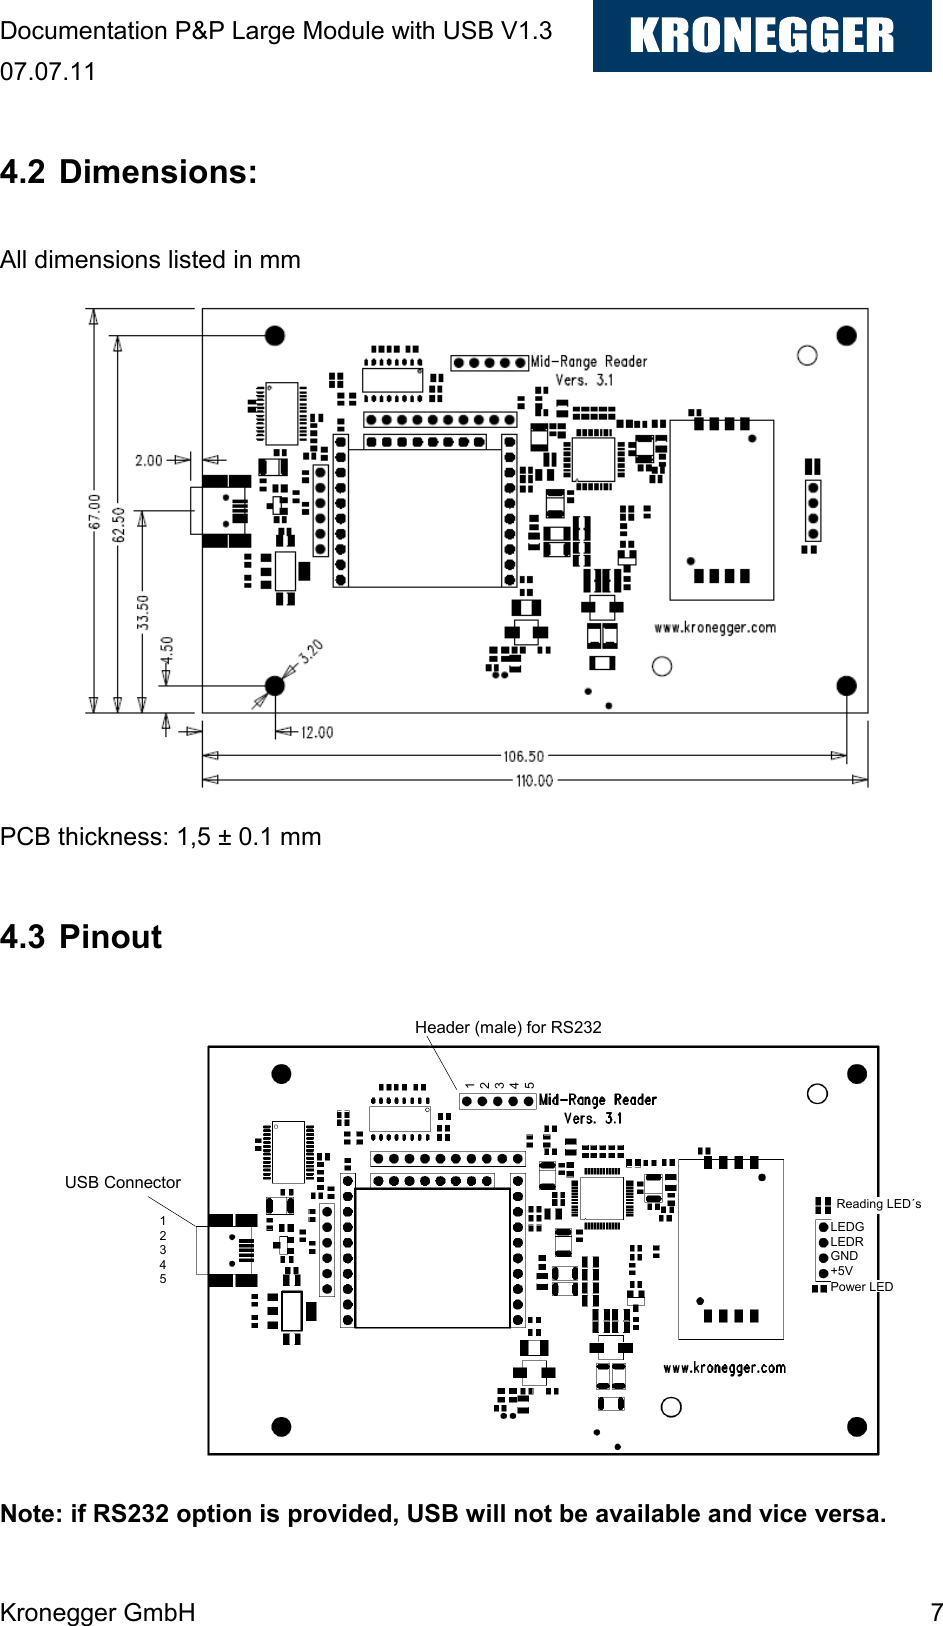 Documentation P&amp;P Large Module with USB V1.3 07.07.11 Kronegger GmbH    7  4.2 Dimensions:  All dimensions listed in mm              PCB thickness: 1,5 ± 0.1 mm  4.3 Pinout              Note: if RS232 option is provided, USB will not be available and vice versa.  1 2 3 4 5 USB Connector 1 2 3 4 5 Header (male) for RS232 LEDG LEDR GND +5V Reading LED´s Power LED 